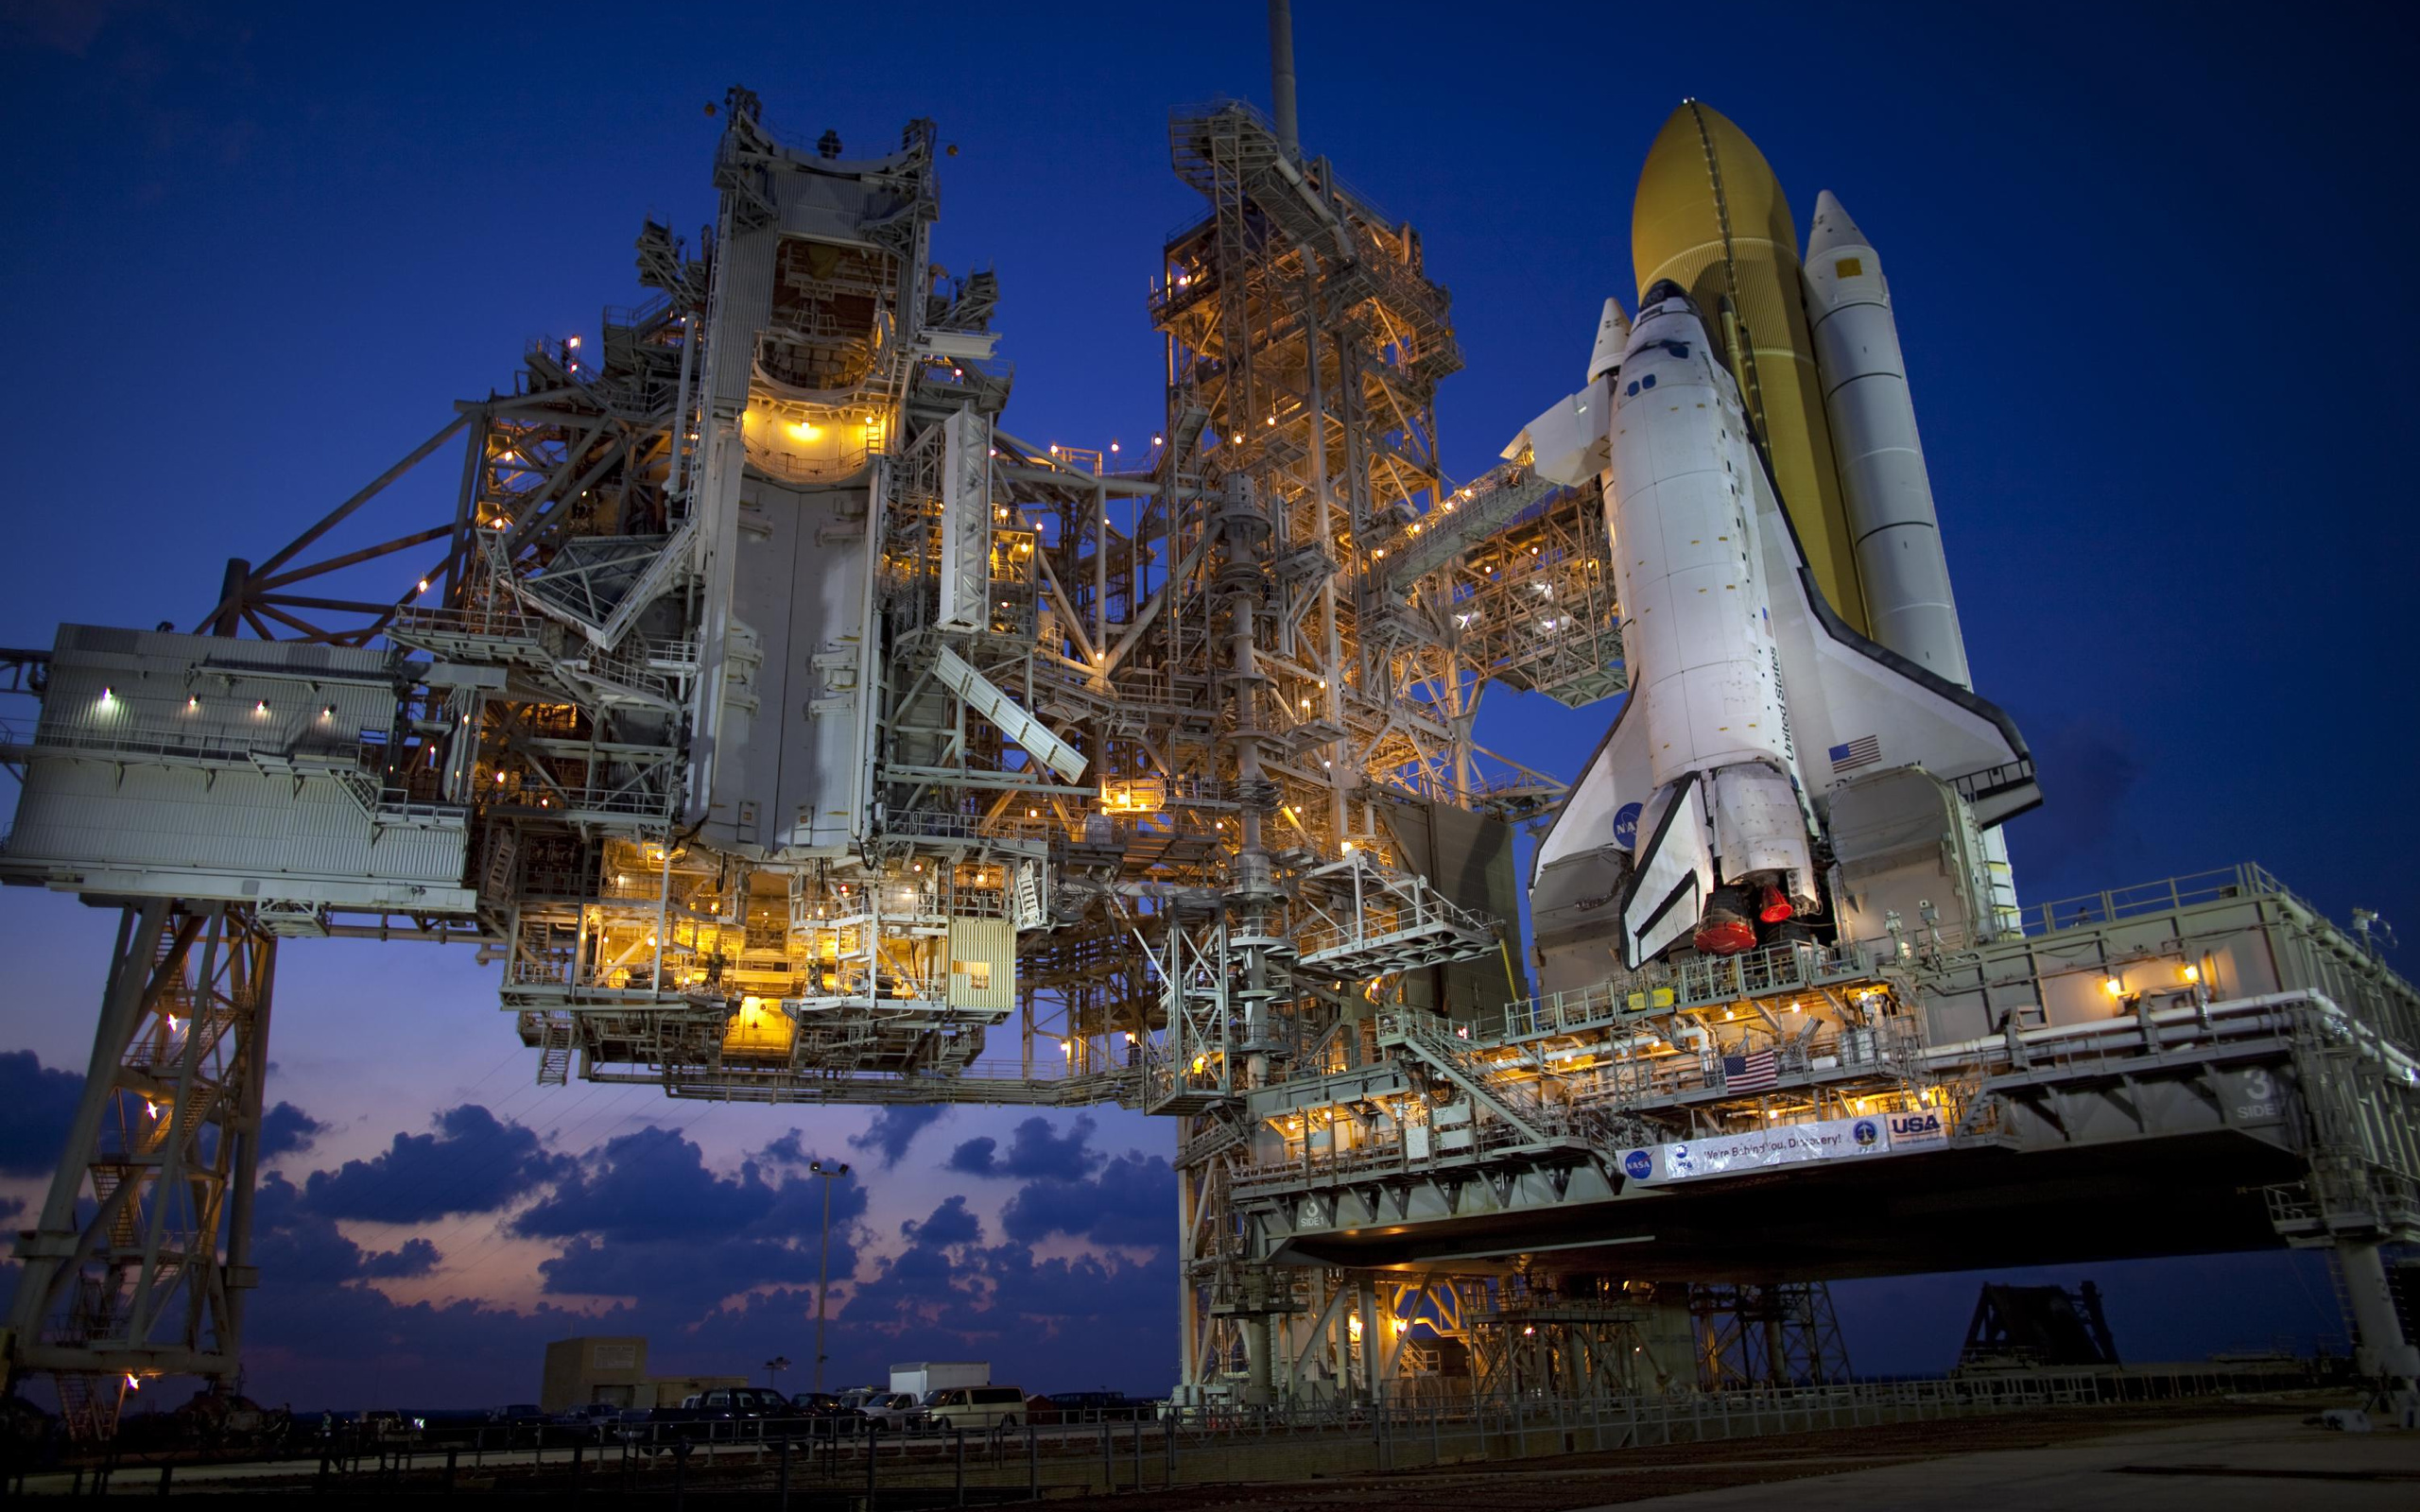 Vehicles Space Shuttle Discovery 2560x1600